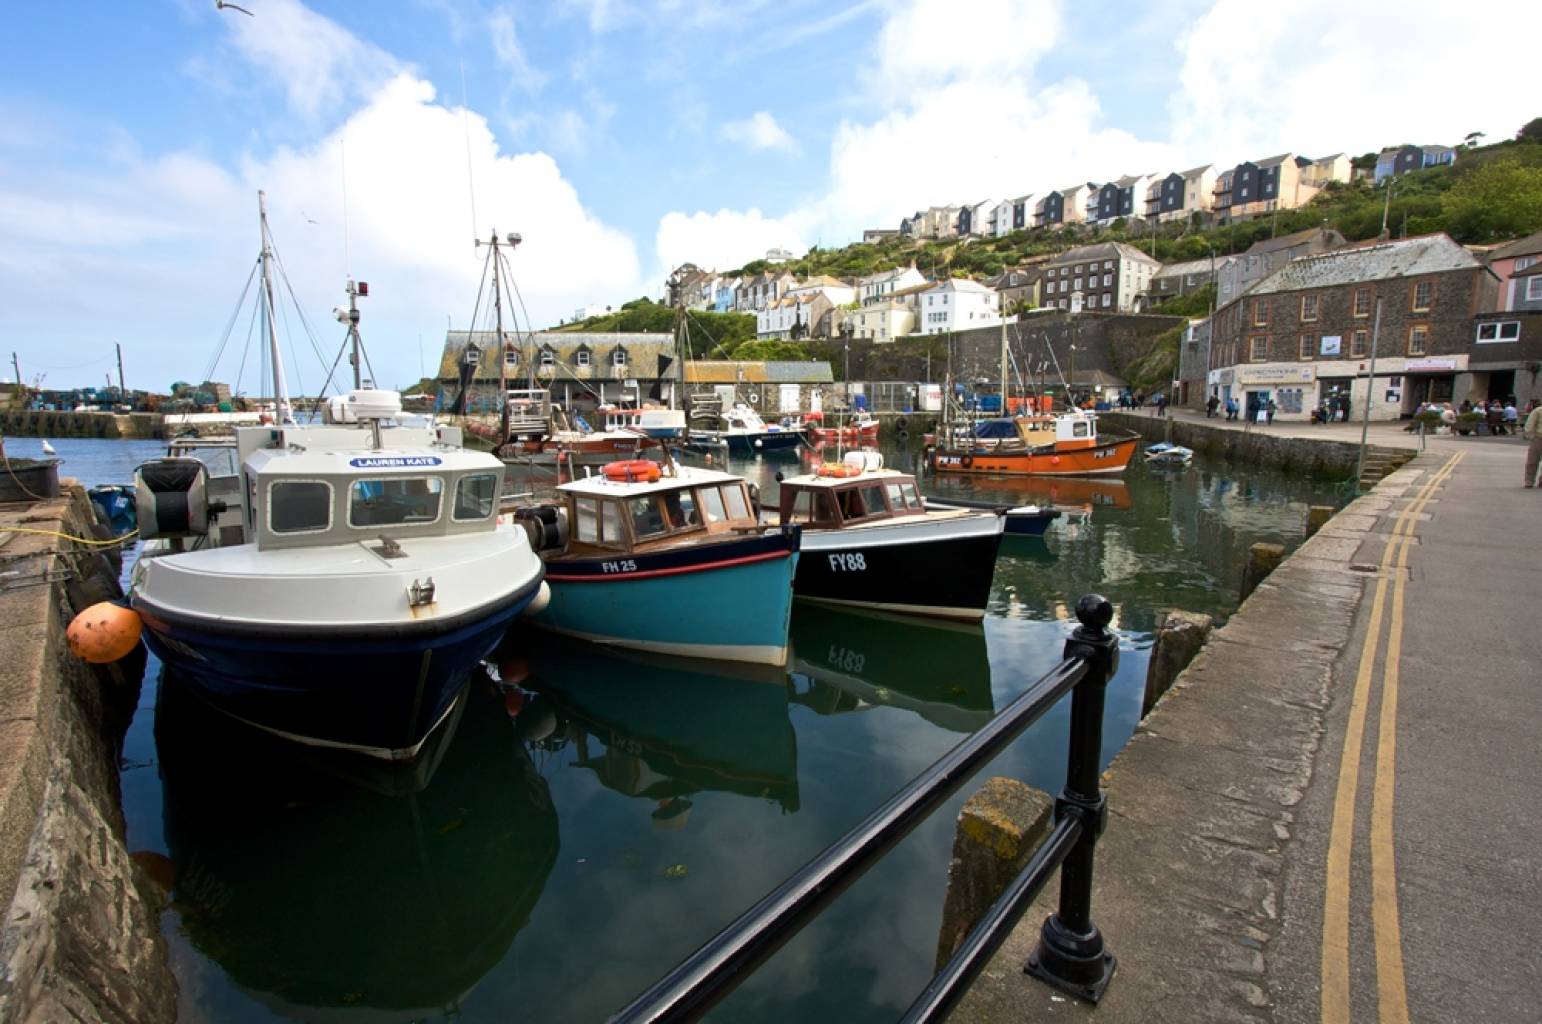 Beachcombers Holiday Cottage - Mevagissey Harbour